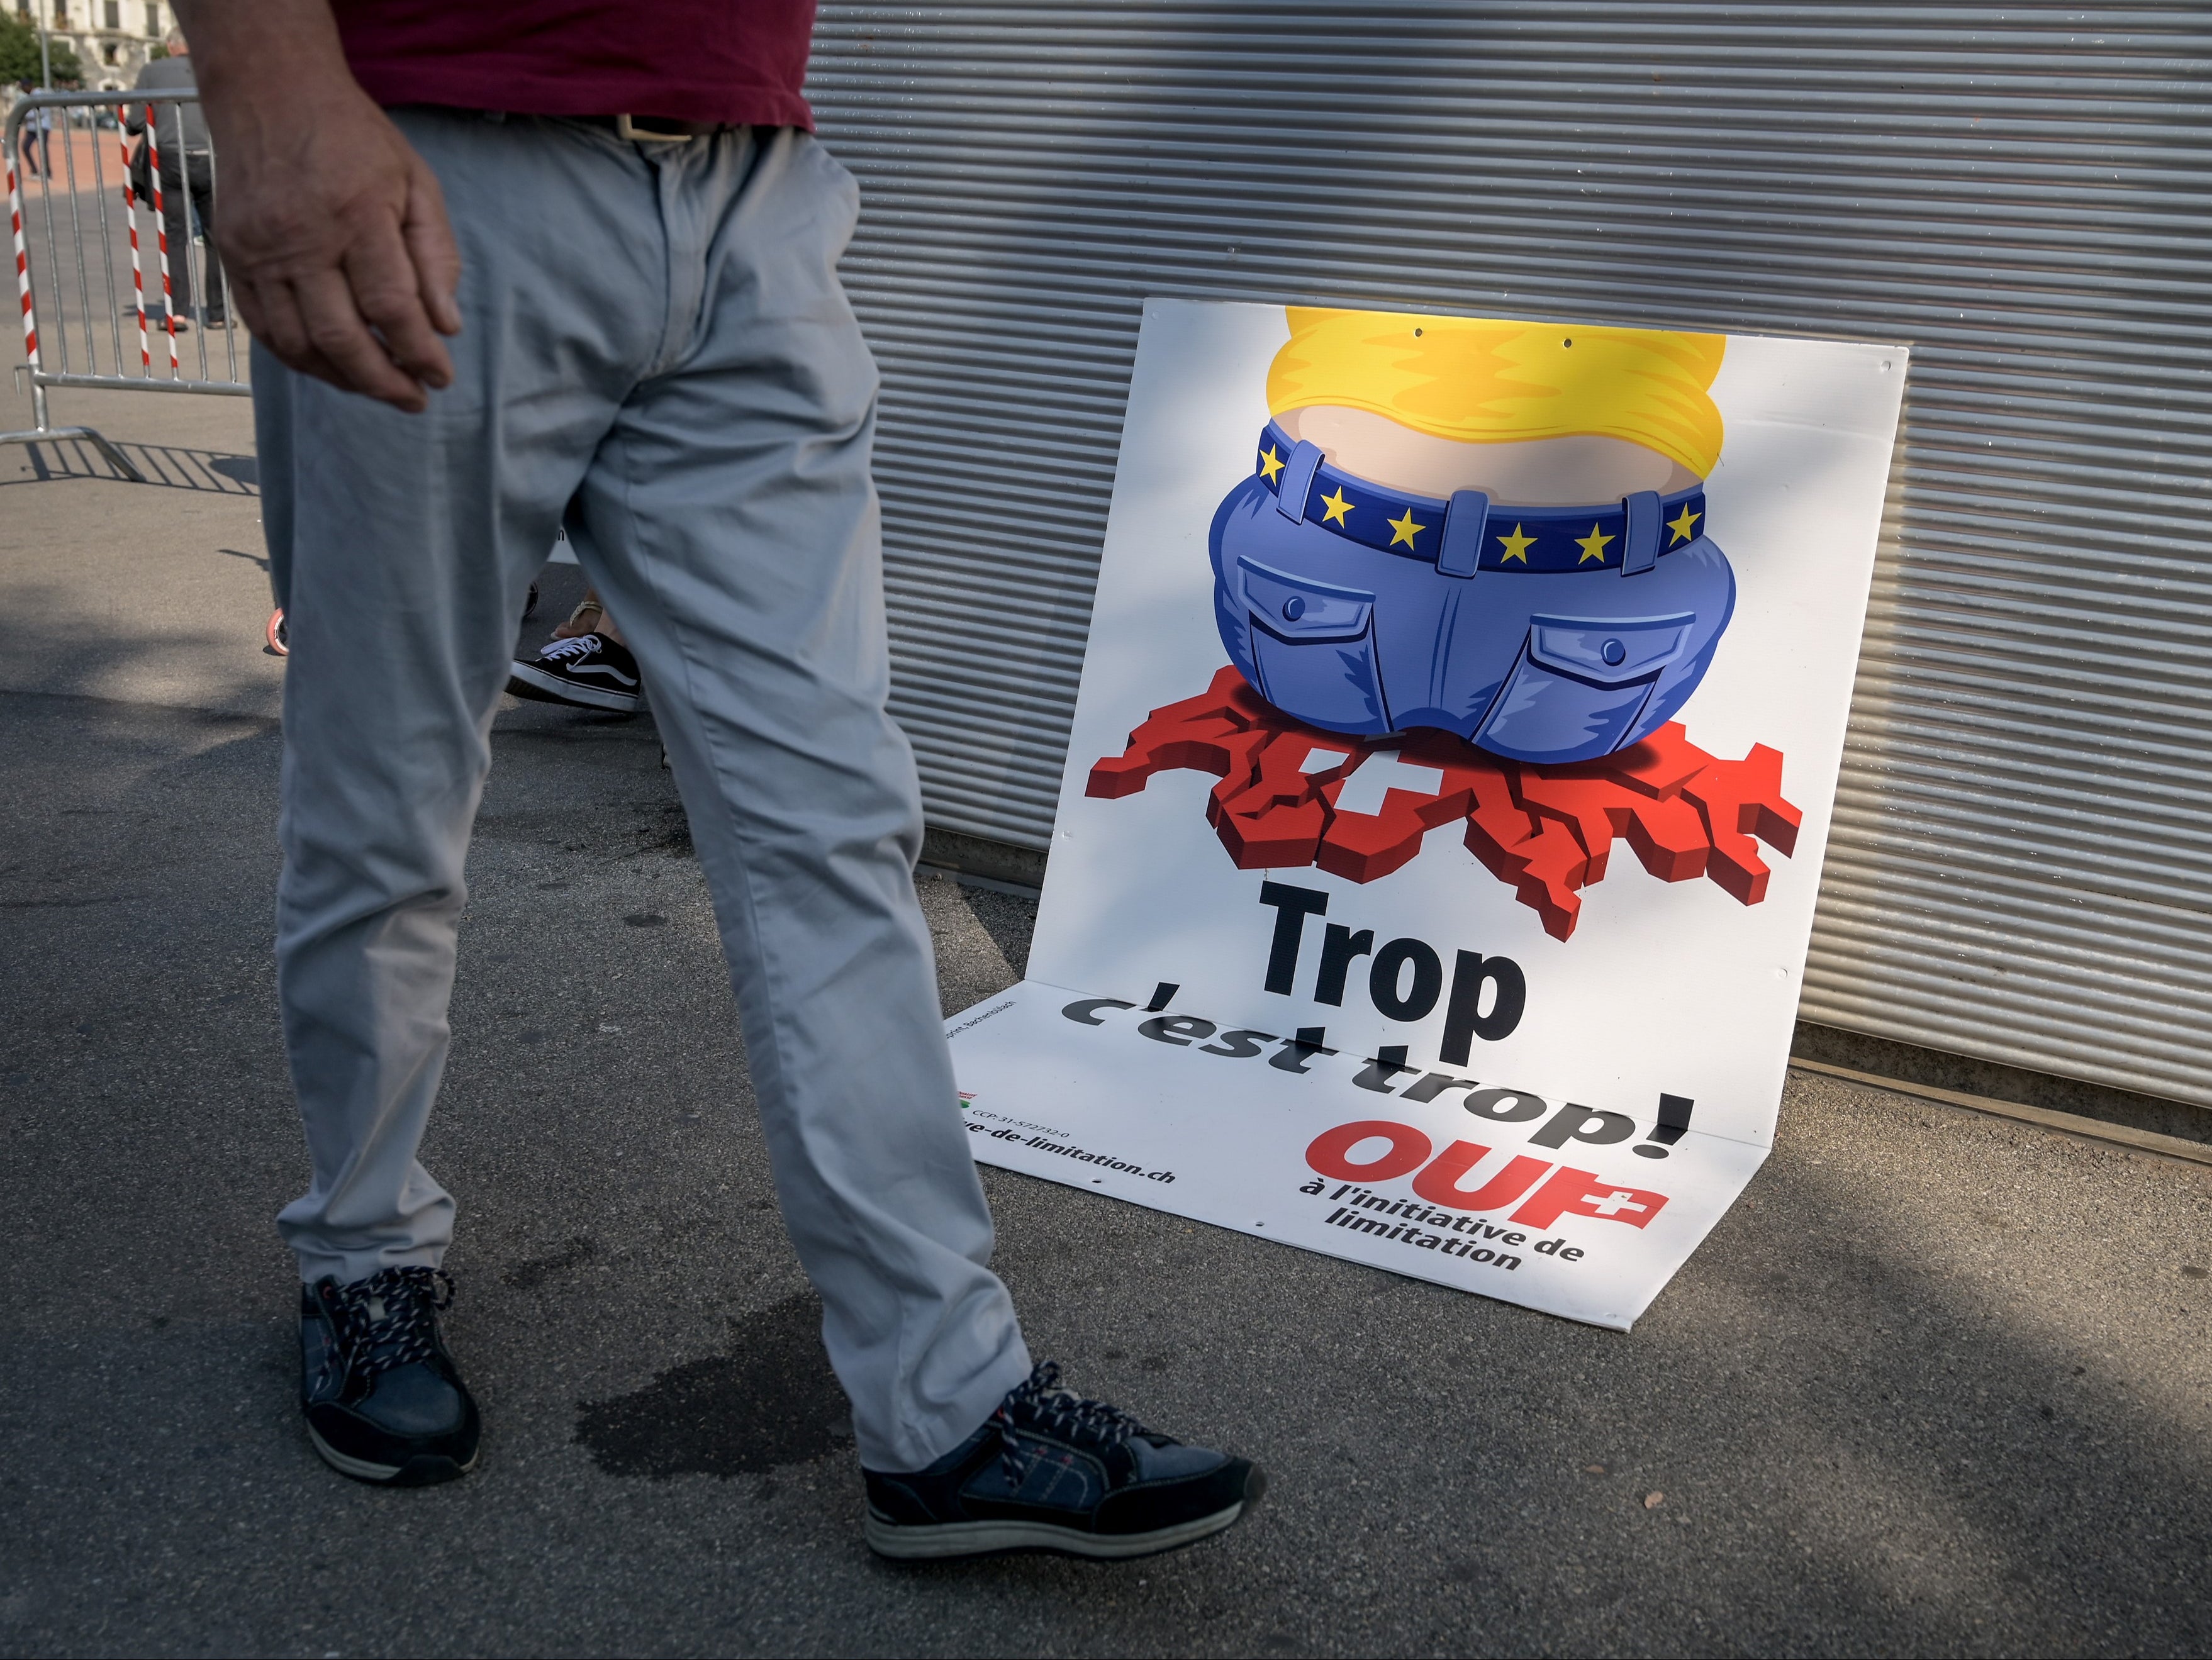 An electoral poster by right-wing Swiss Peoples Party shows a cartoon worker wearing a belt studded with EU stars, crushing the red and white map of Switzerland with his wide rear end that translates from French as 'Too much is too much!'